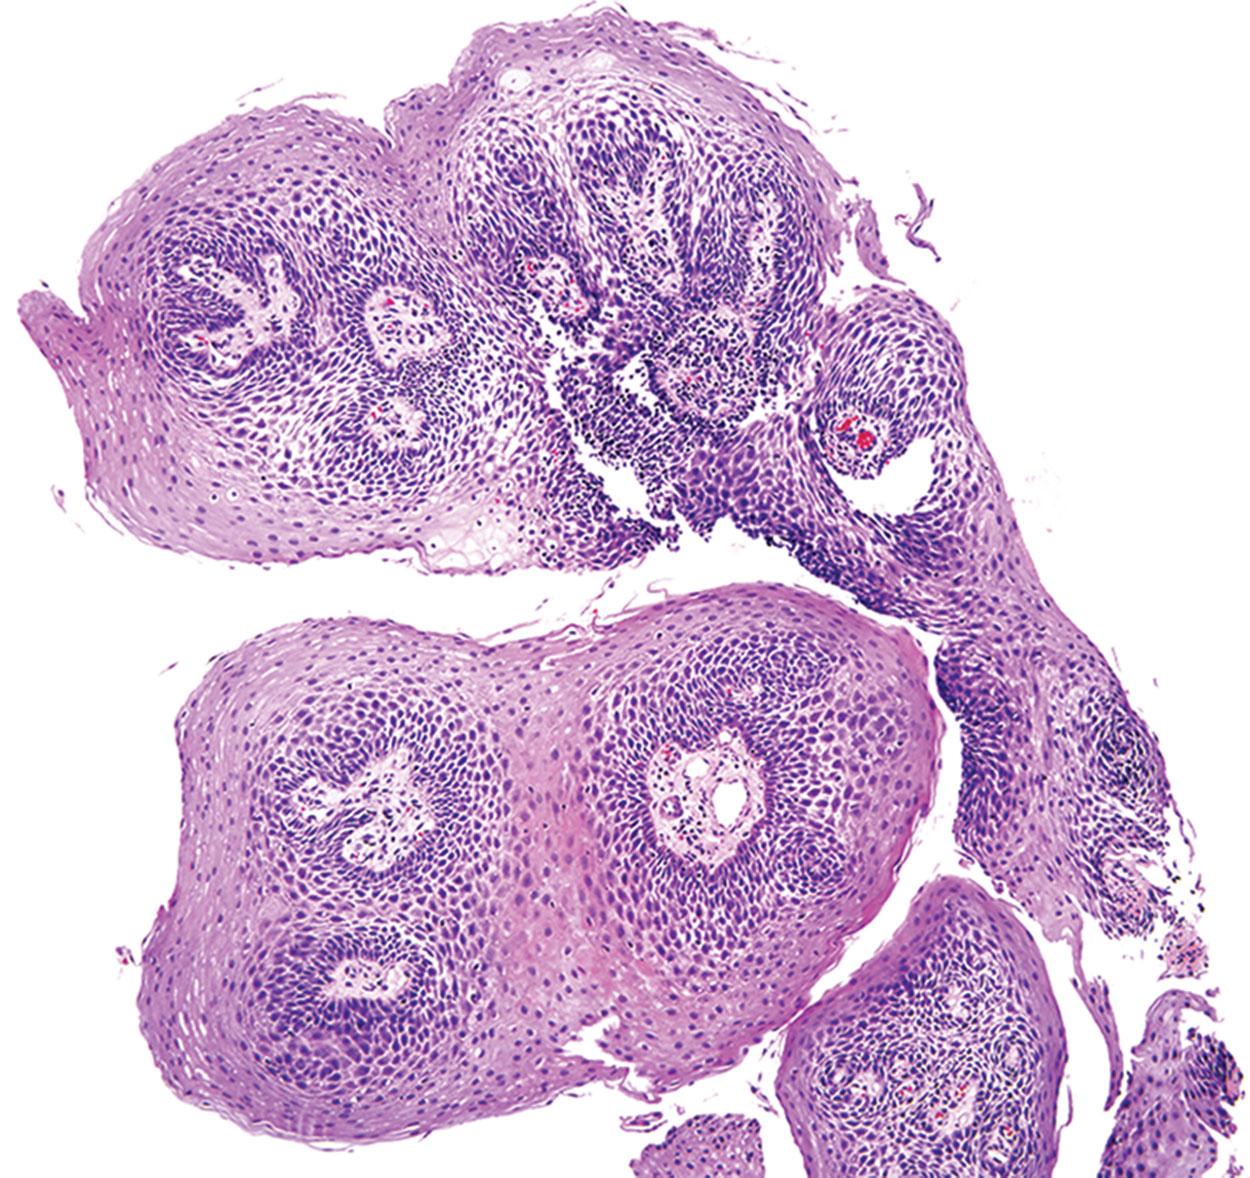 Figure 2.1, Squamous papilloma of the esophagus. Most such tumors are incidental and not associated with human papillomavirus infection.